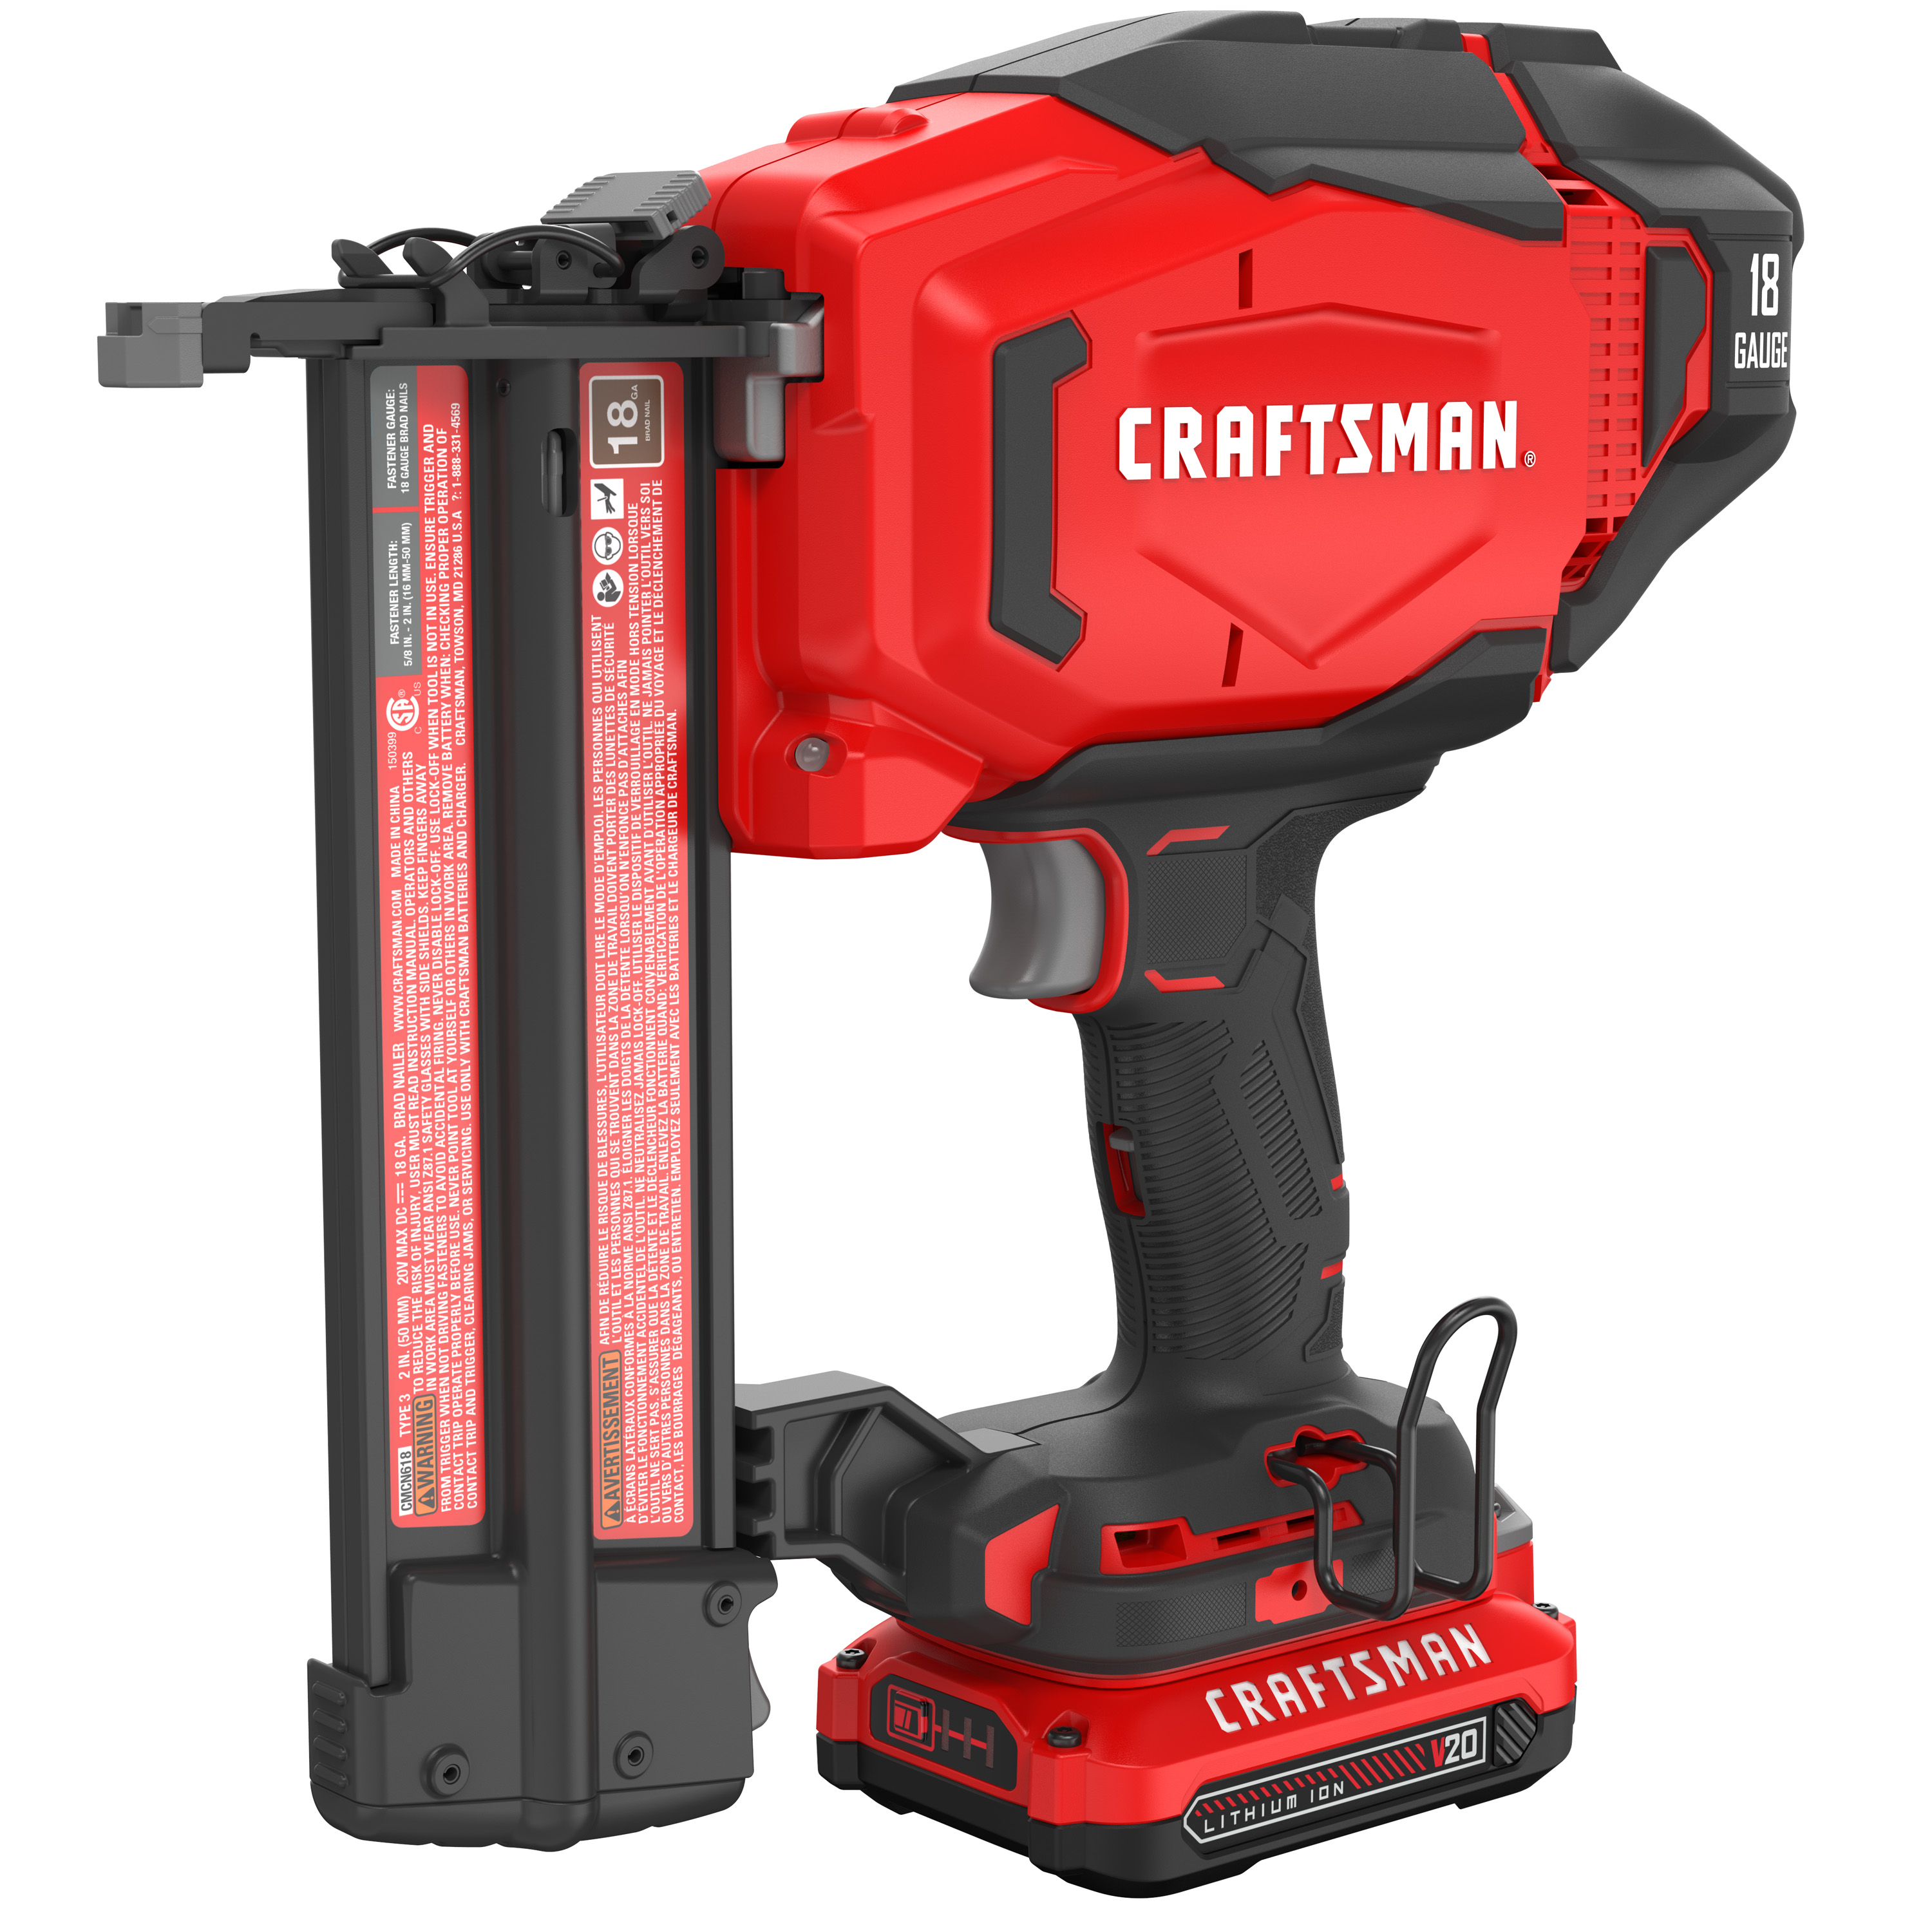 CRAFTSMAN® Introduces Complete Lineup of Power Tools & Equipment